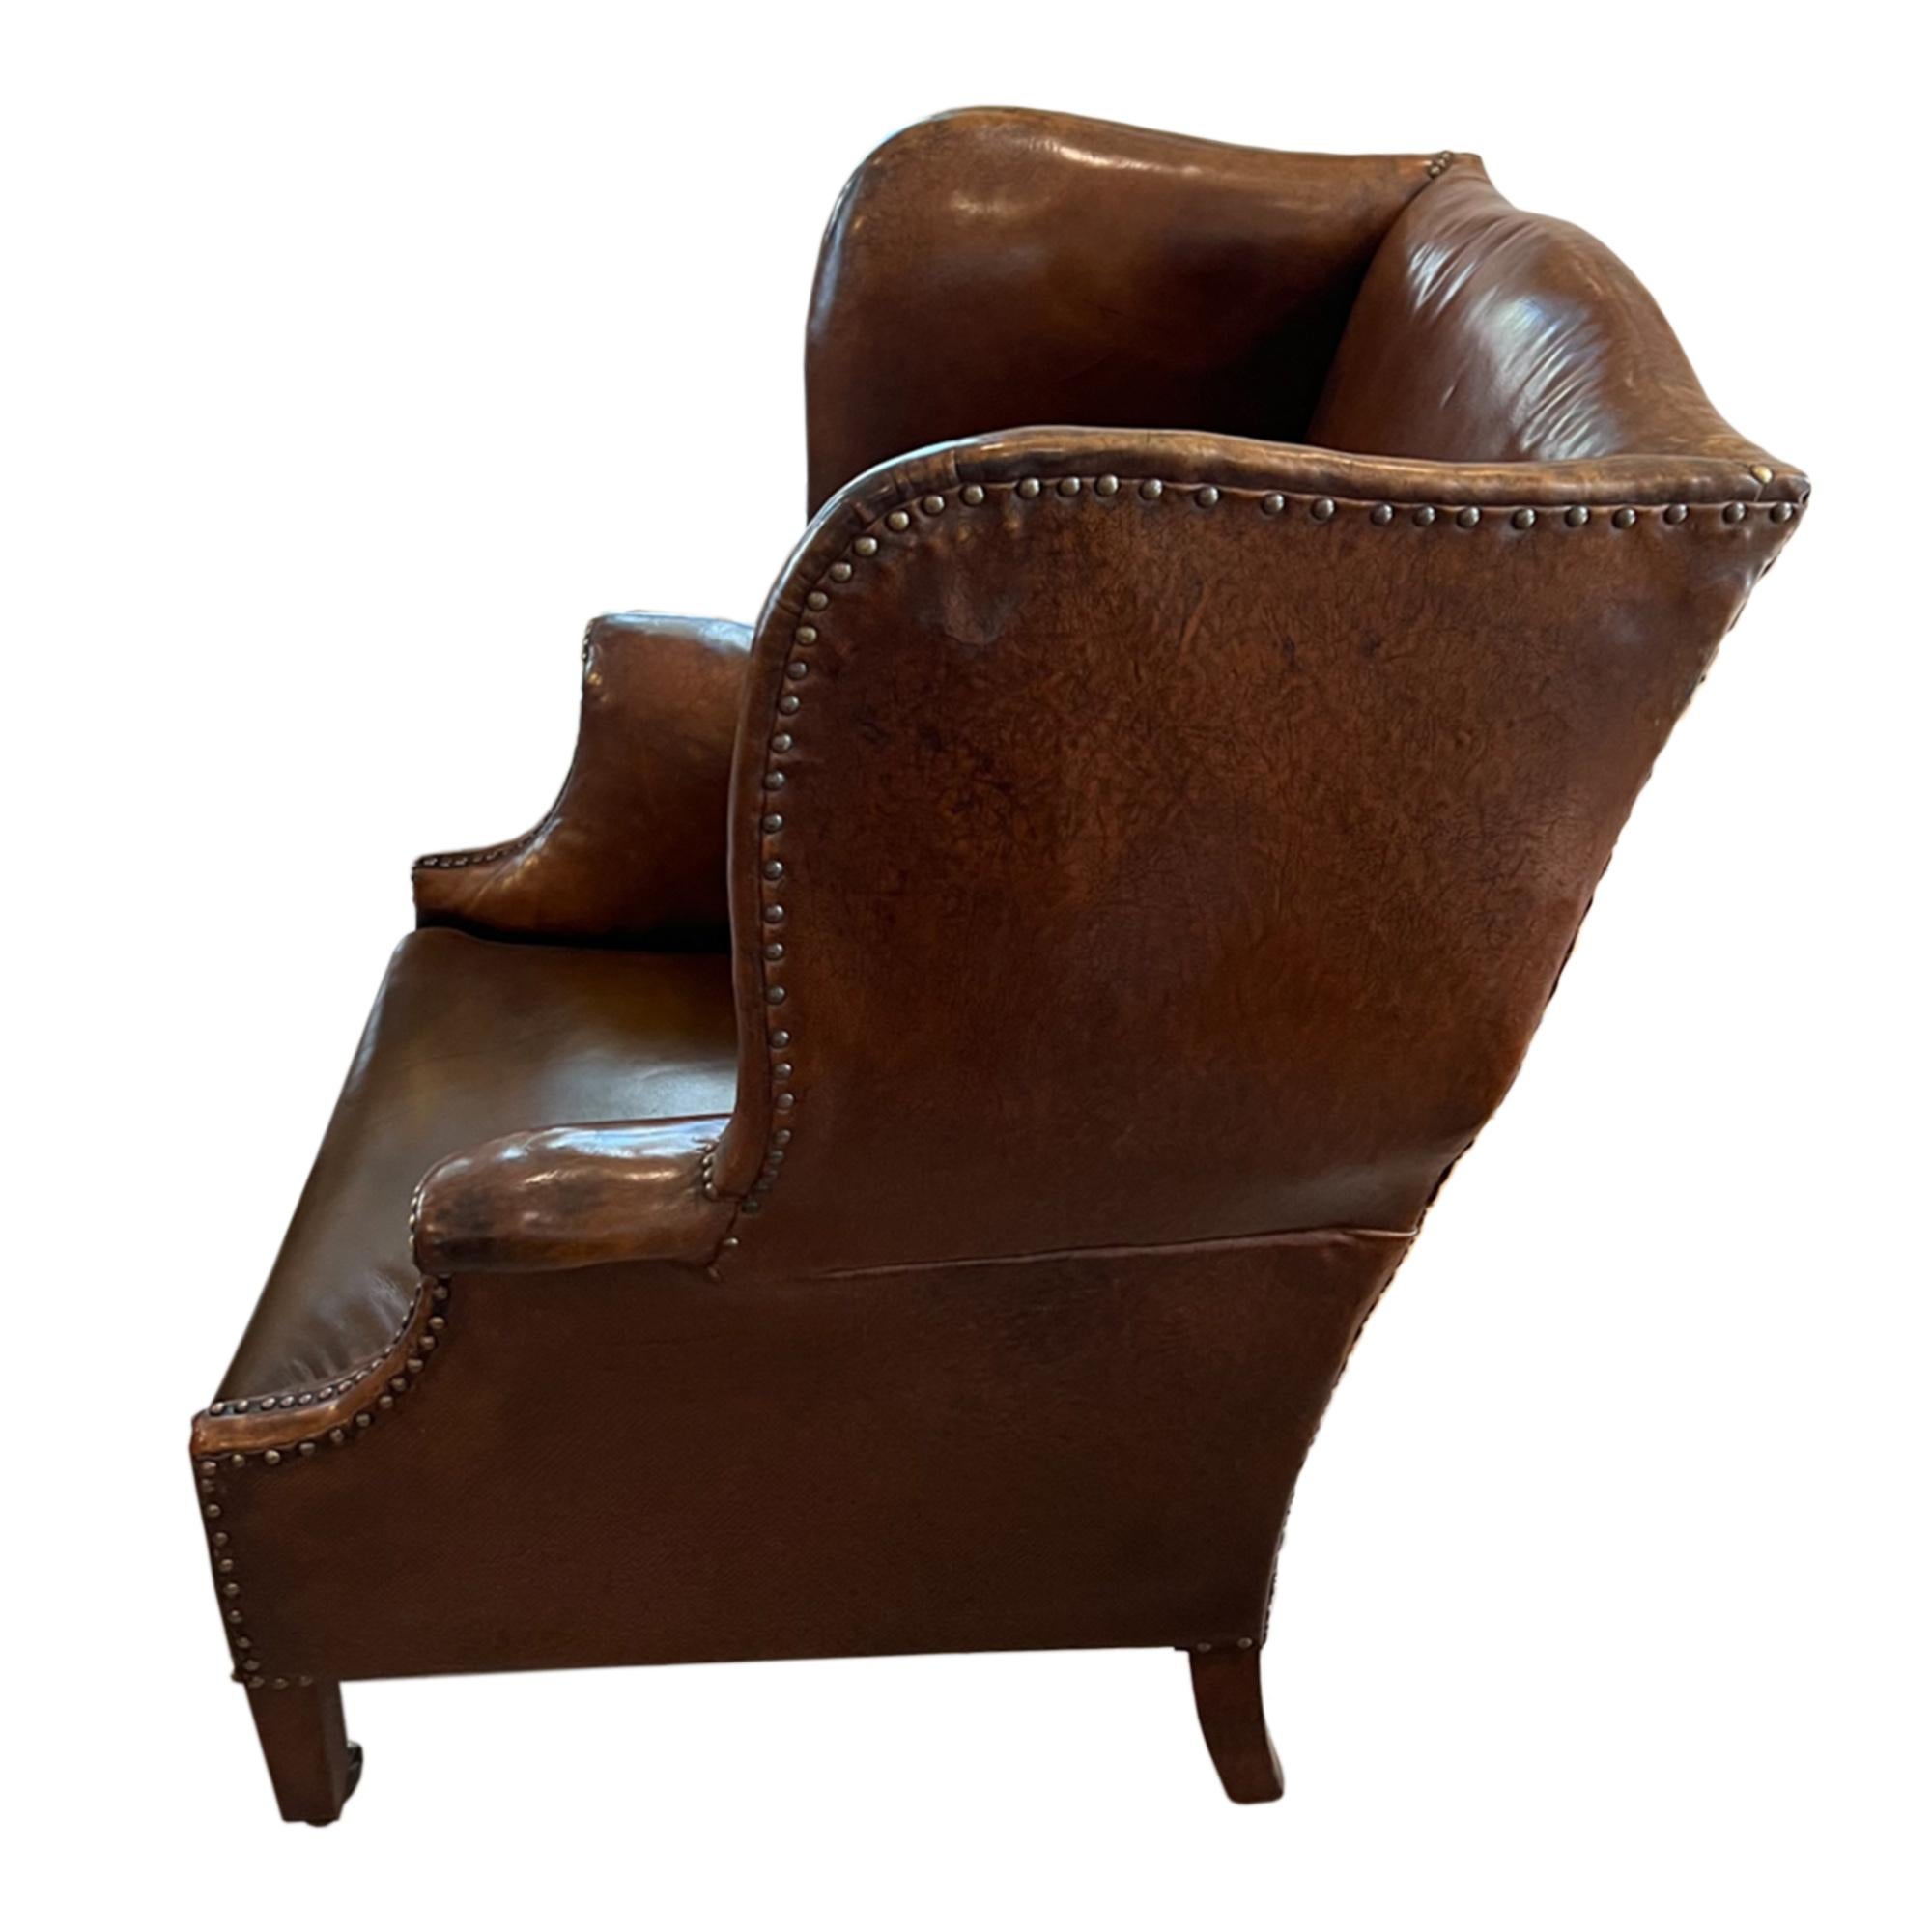 Edwardian English Early 20th Century Leather Wing Chair For Sale